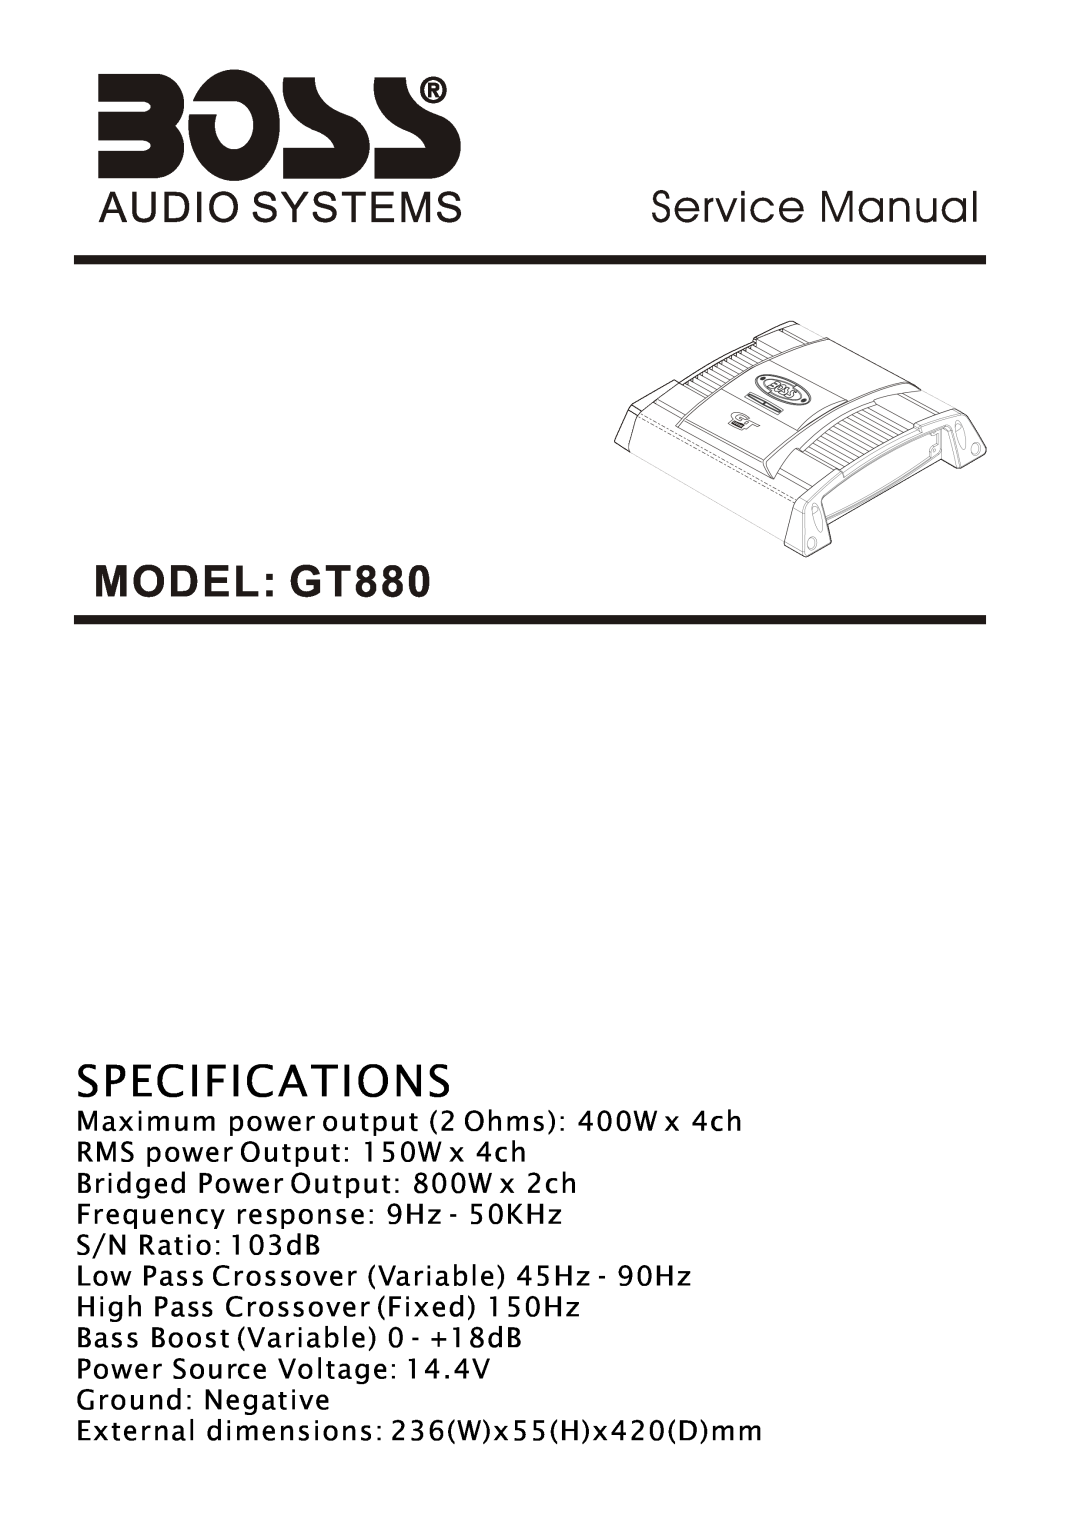 Boss Audio Systems service manual MODEL GT880, Specifications, Maximum power output 2 Ohms 400W x 4ch 